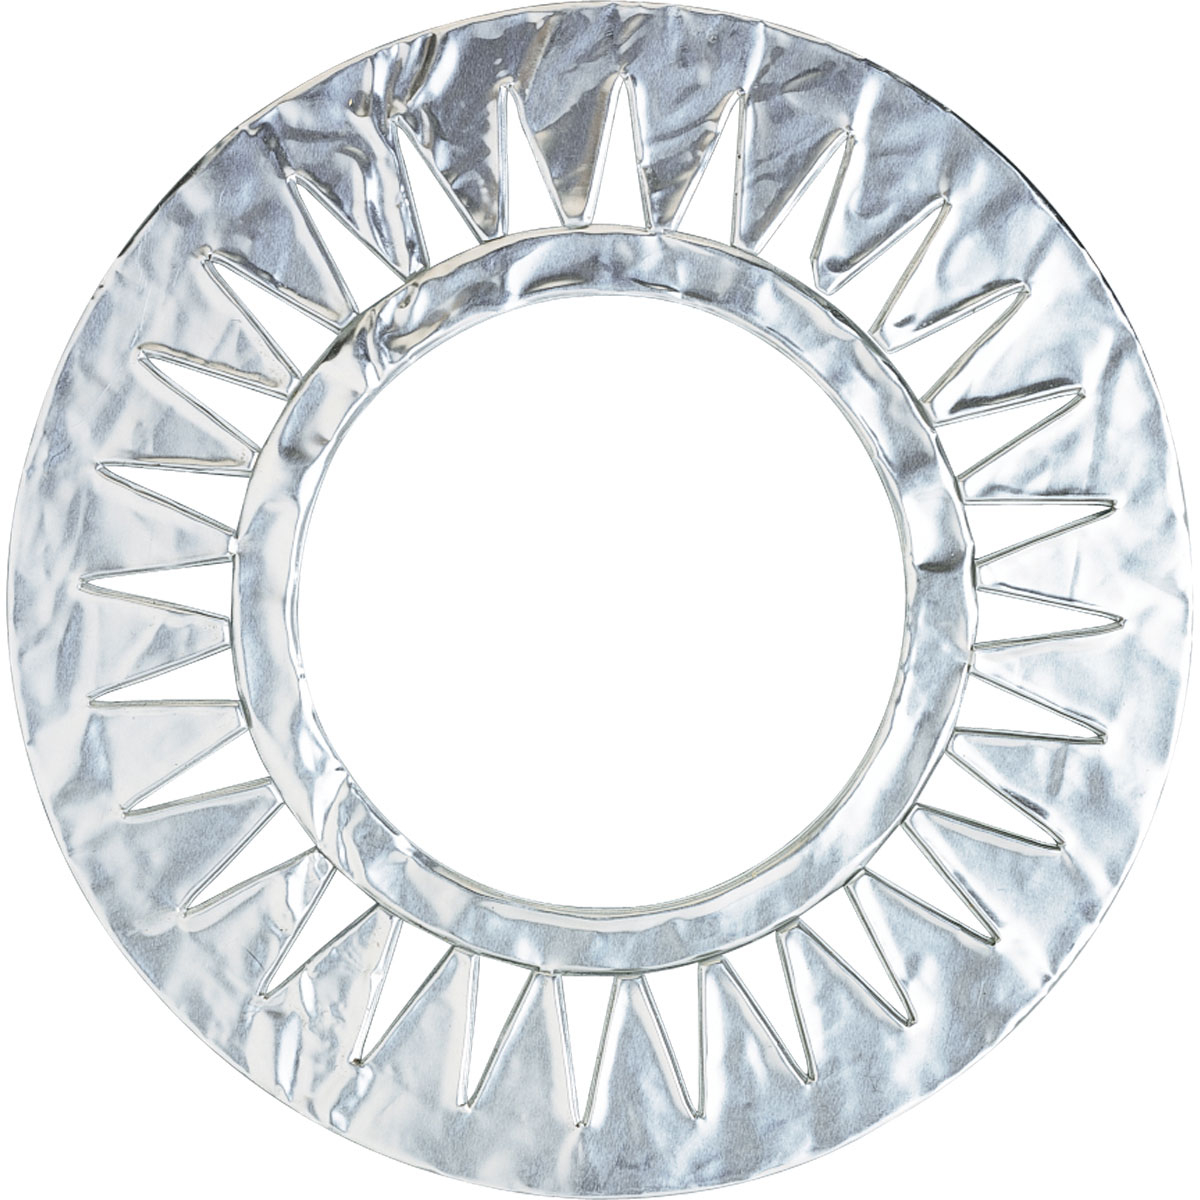 5 in Ceiling Gasket for use with Recessed Housings.